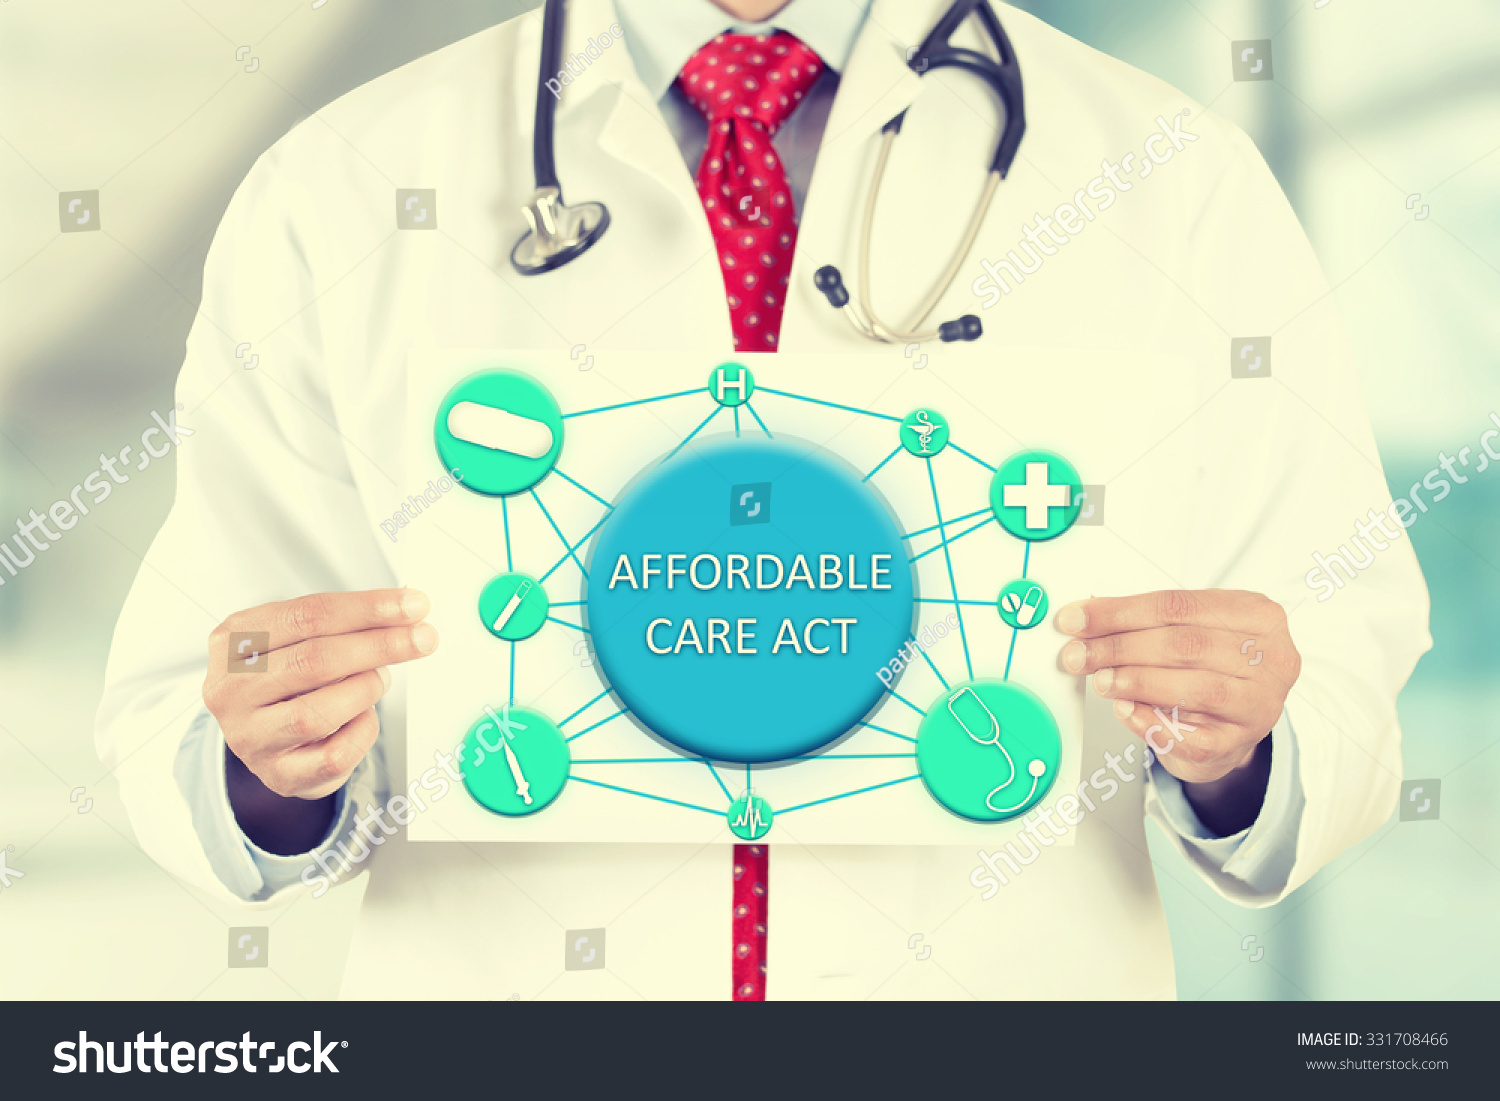 Closeup Doctor Hands Holding White Card Stock Photo ...